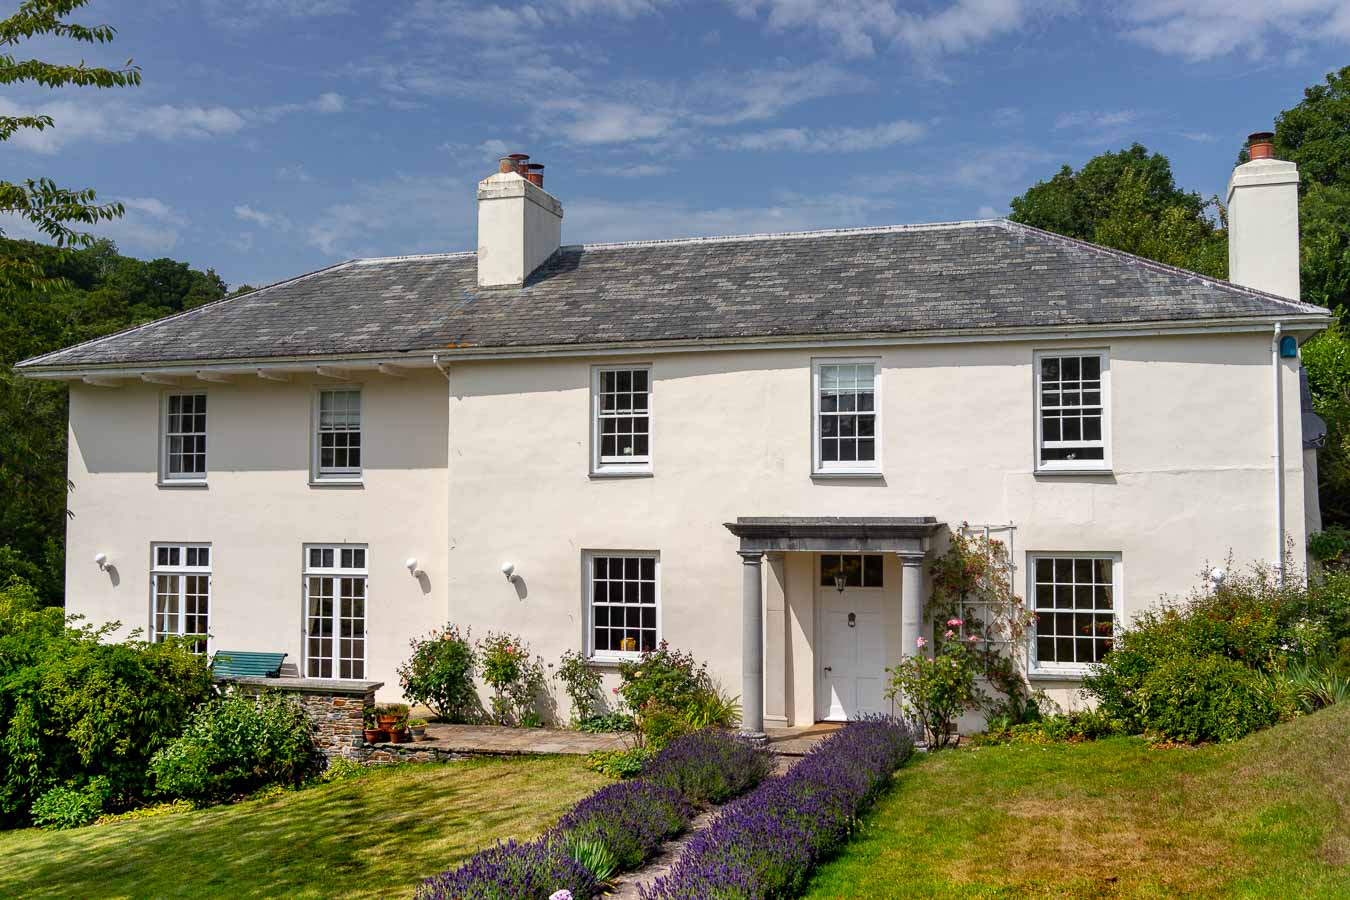 Flear House is a Devon holiday home with private pool that sleeps 10 people. 